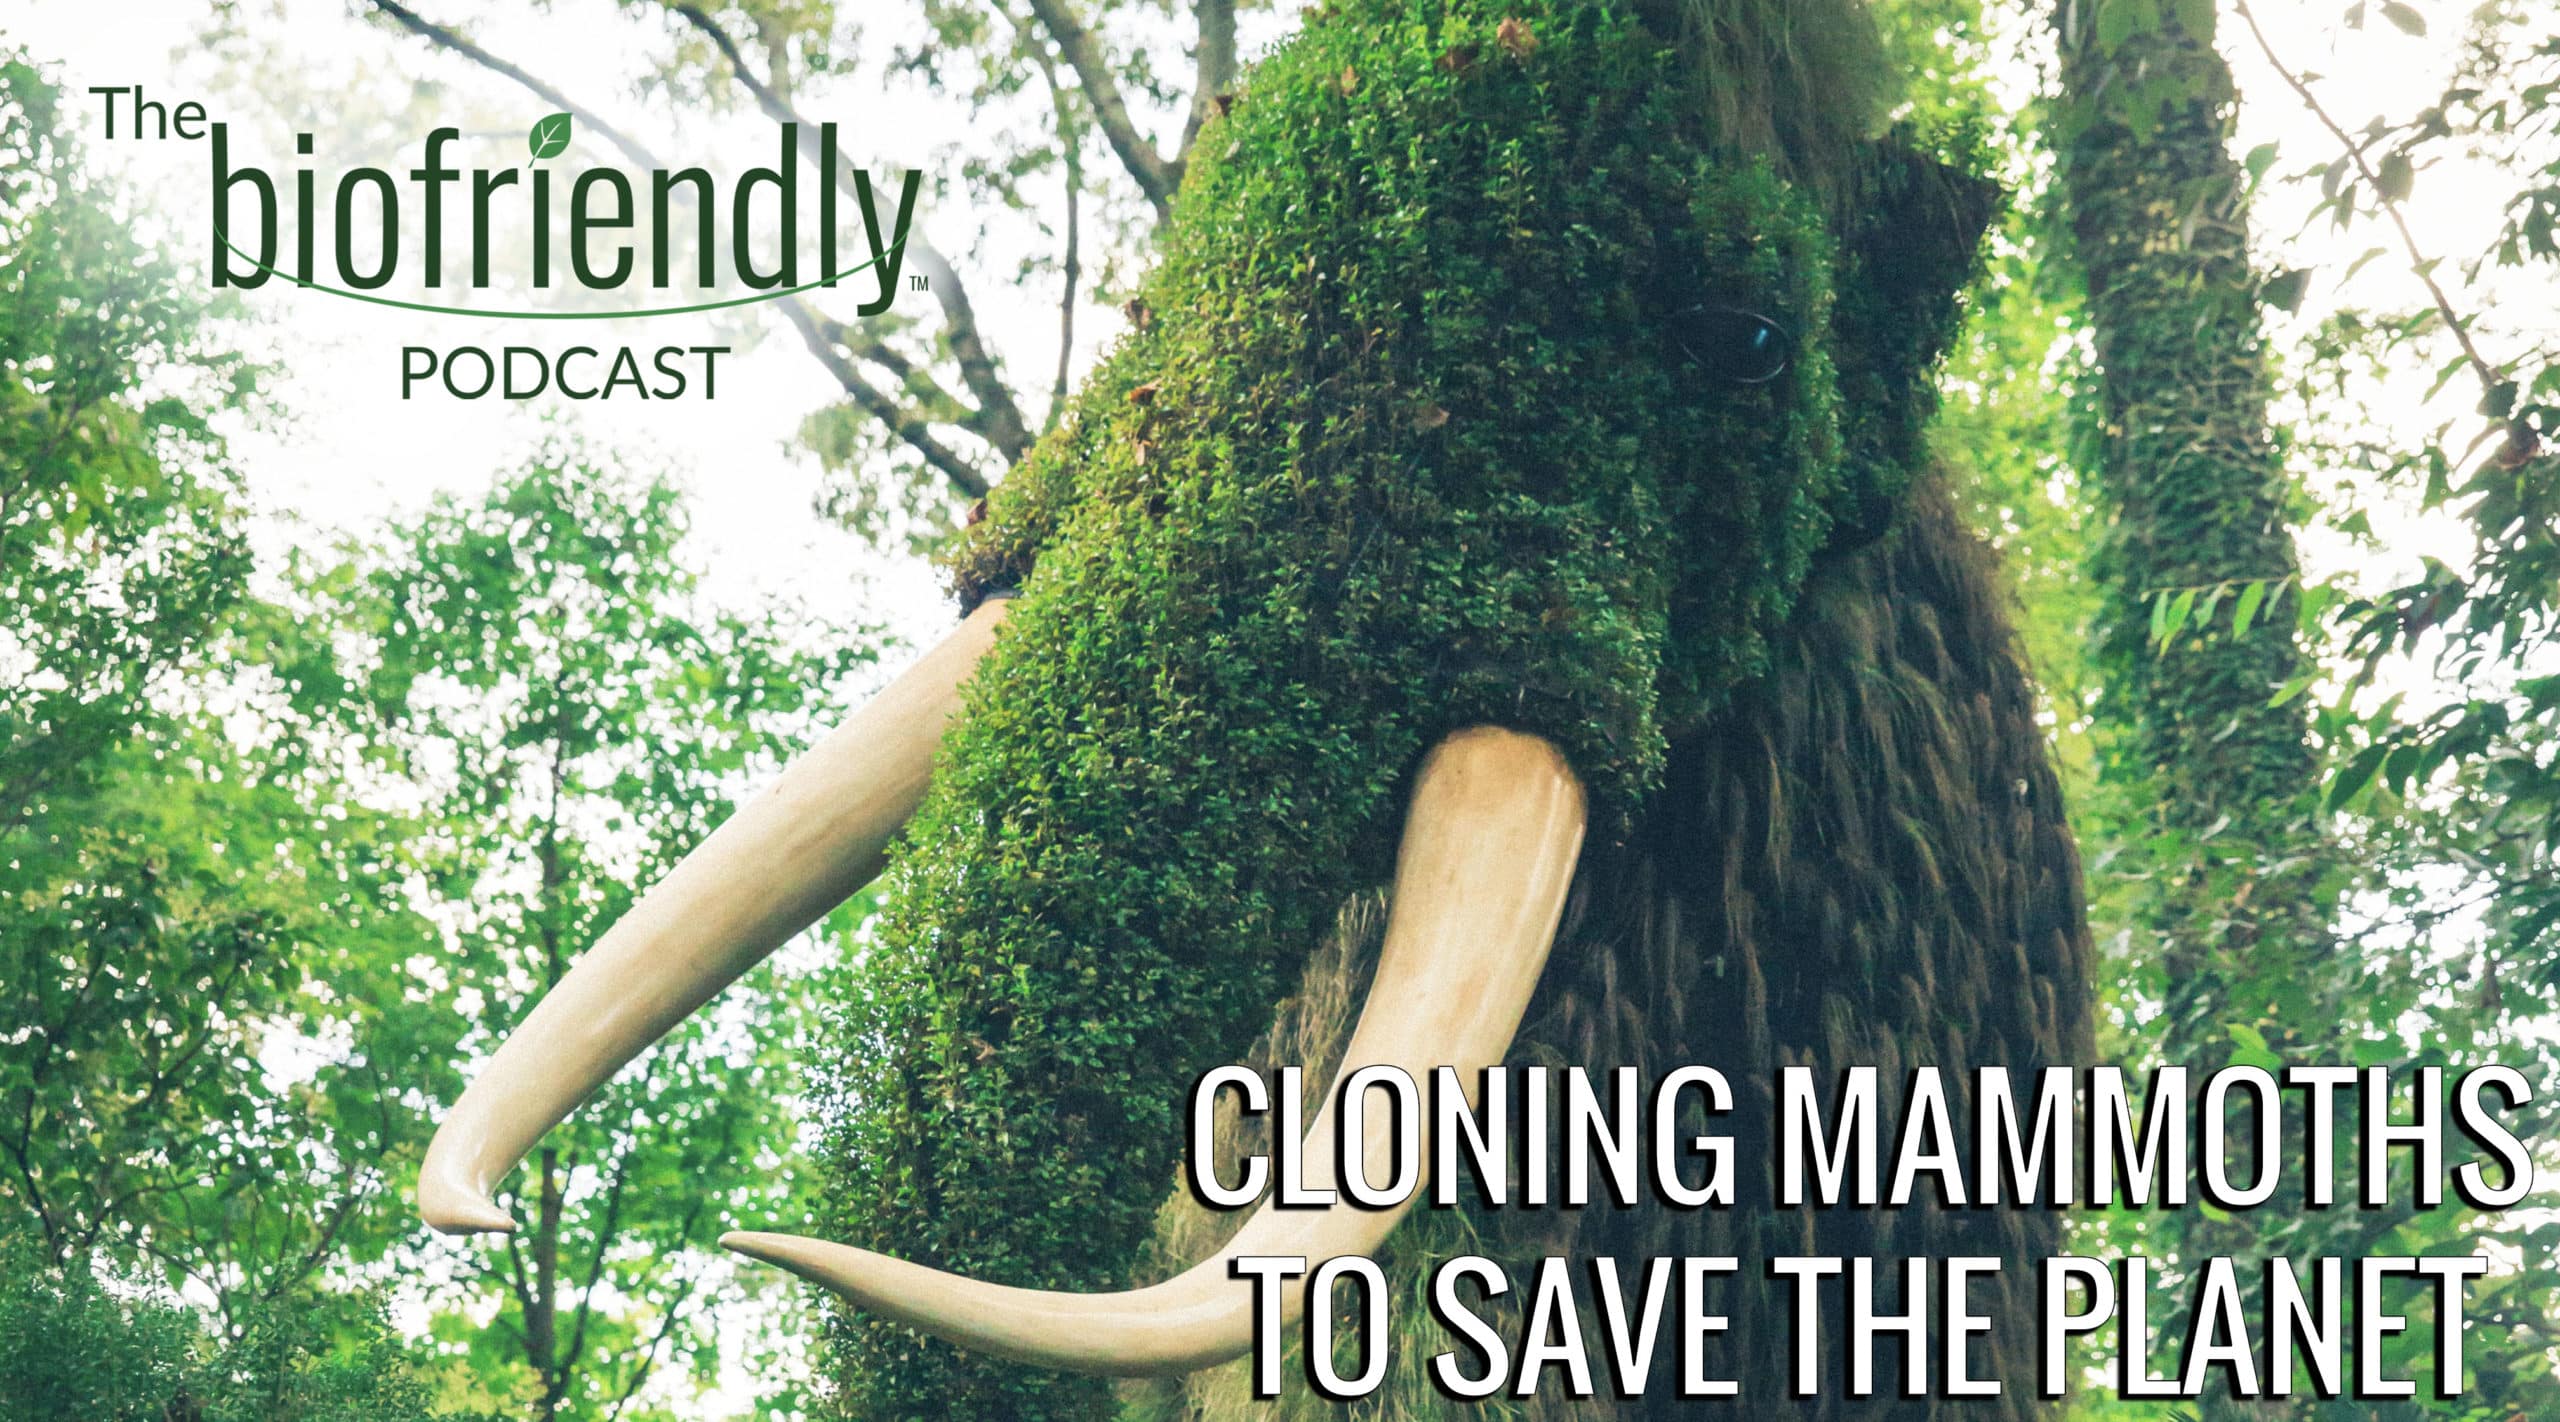 The Biofriendly Podcast - Episode 30 - Cloning Mammoths To Save The Planet